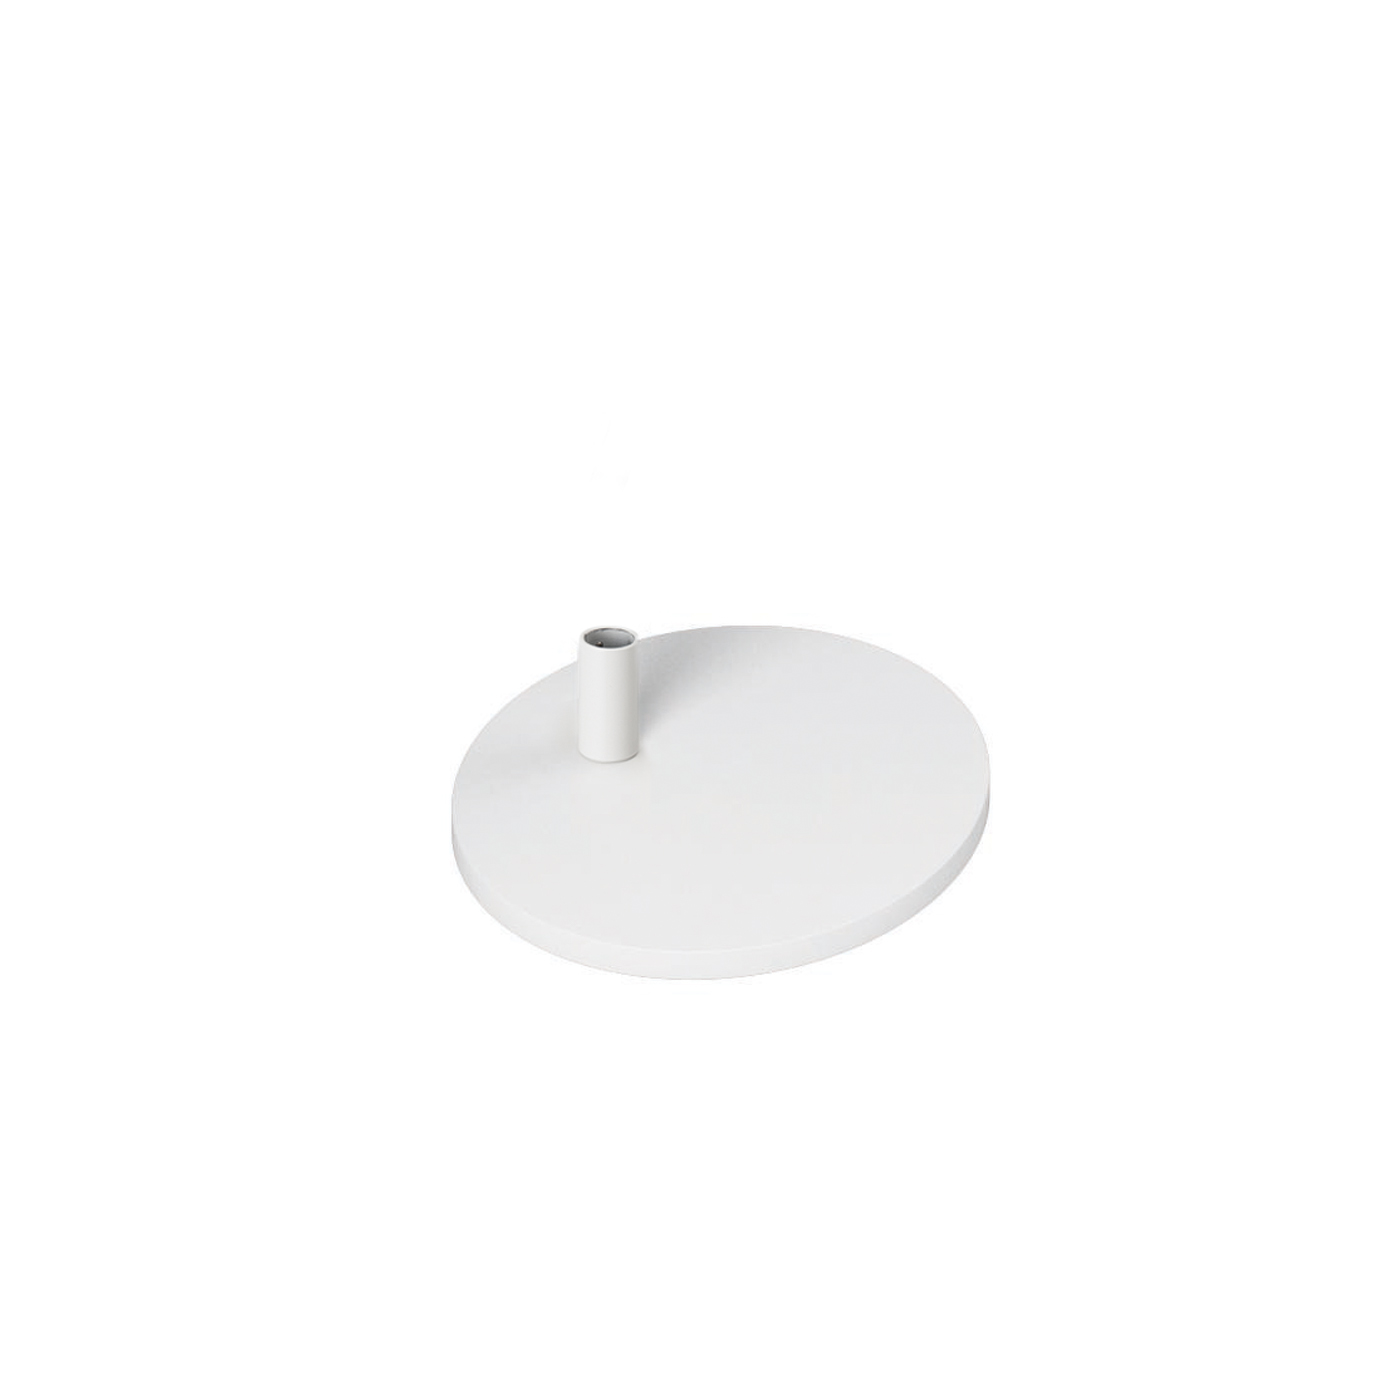 Tabletop Stand, Round, White, for Para.Mi Bench Light - 1 piece